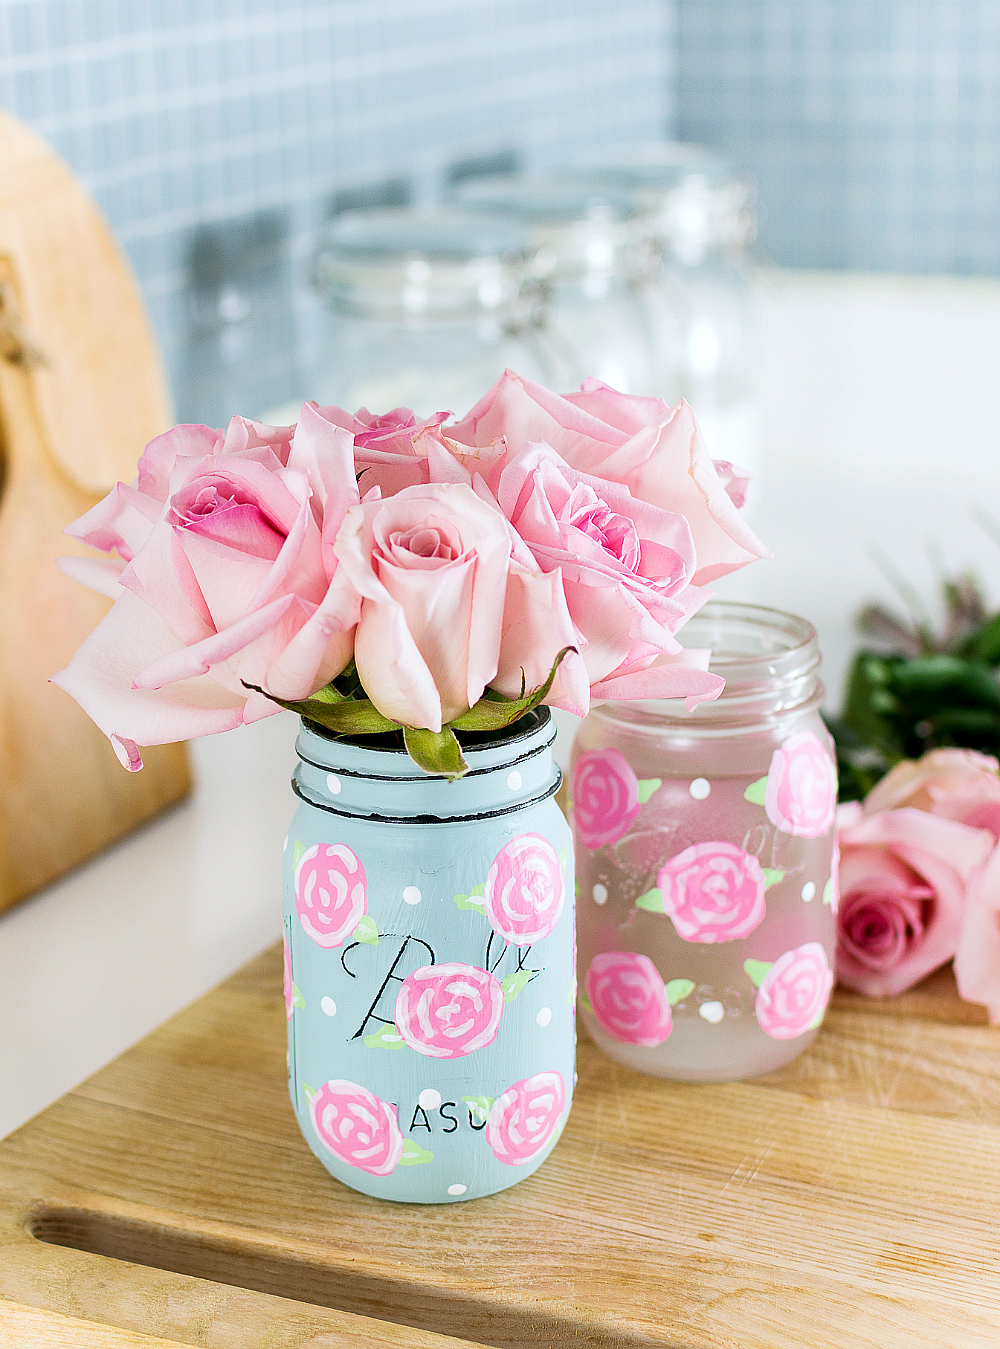 Painted Rose Mason Jars - How To Paint a Rose Tutorial - Easy Rose Painting Tutorial @itallstartedwithpaint.com